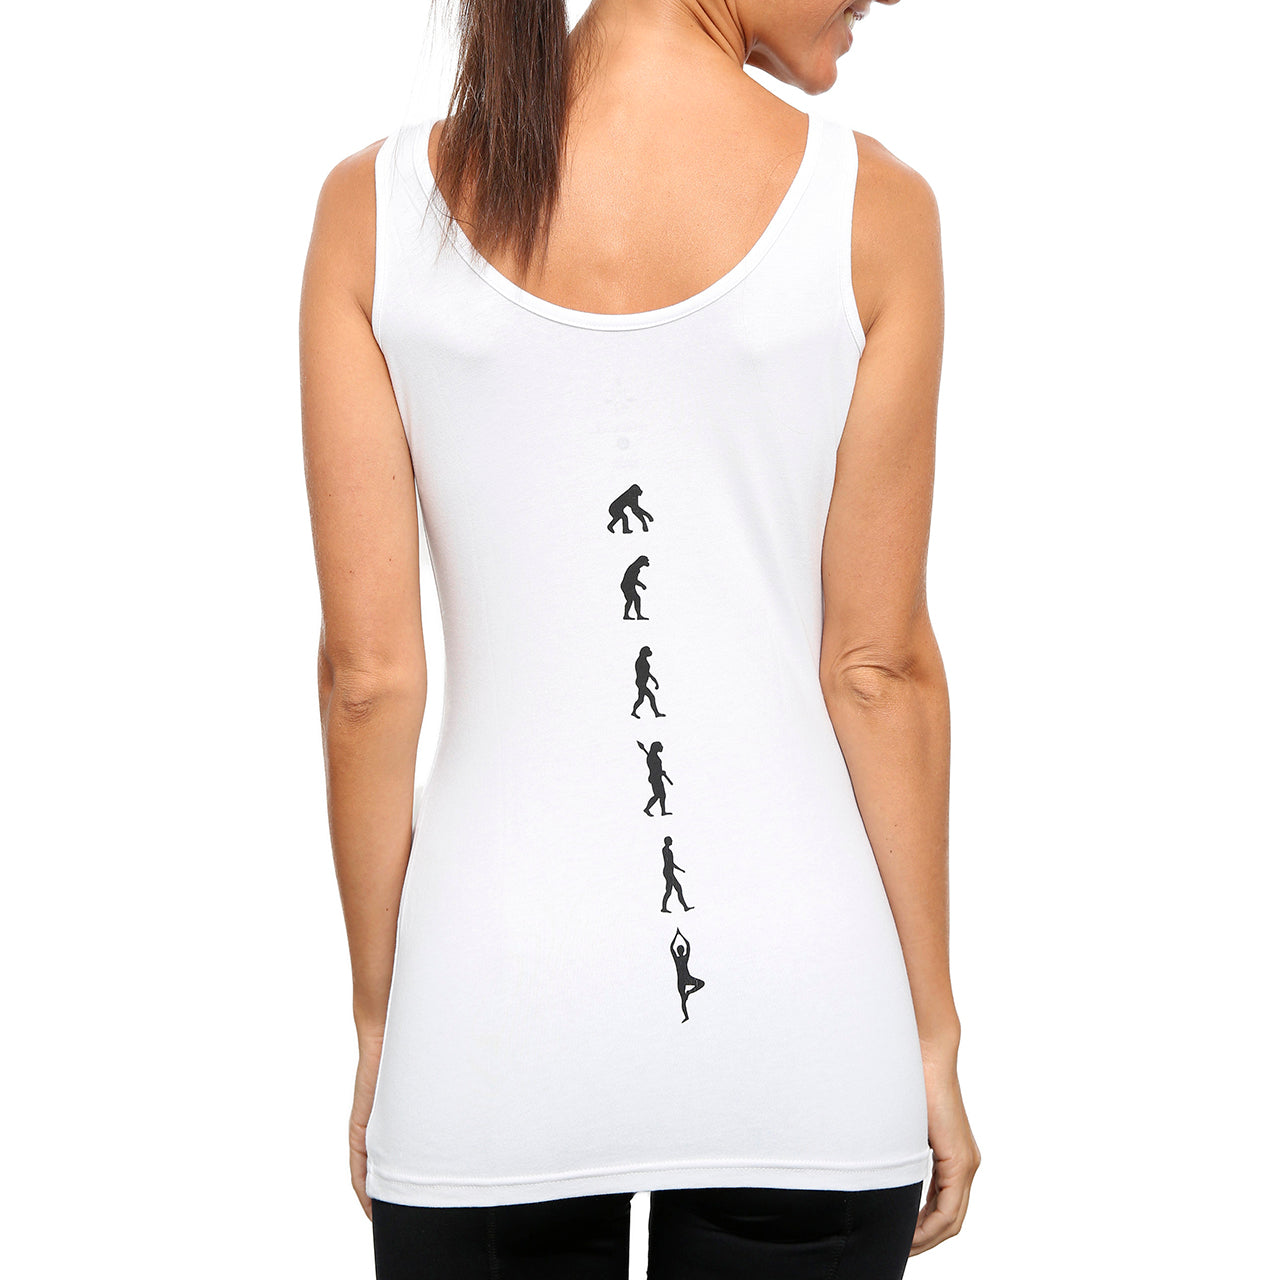 Stylish and Comfortable Women's Workout Tank Top